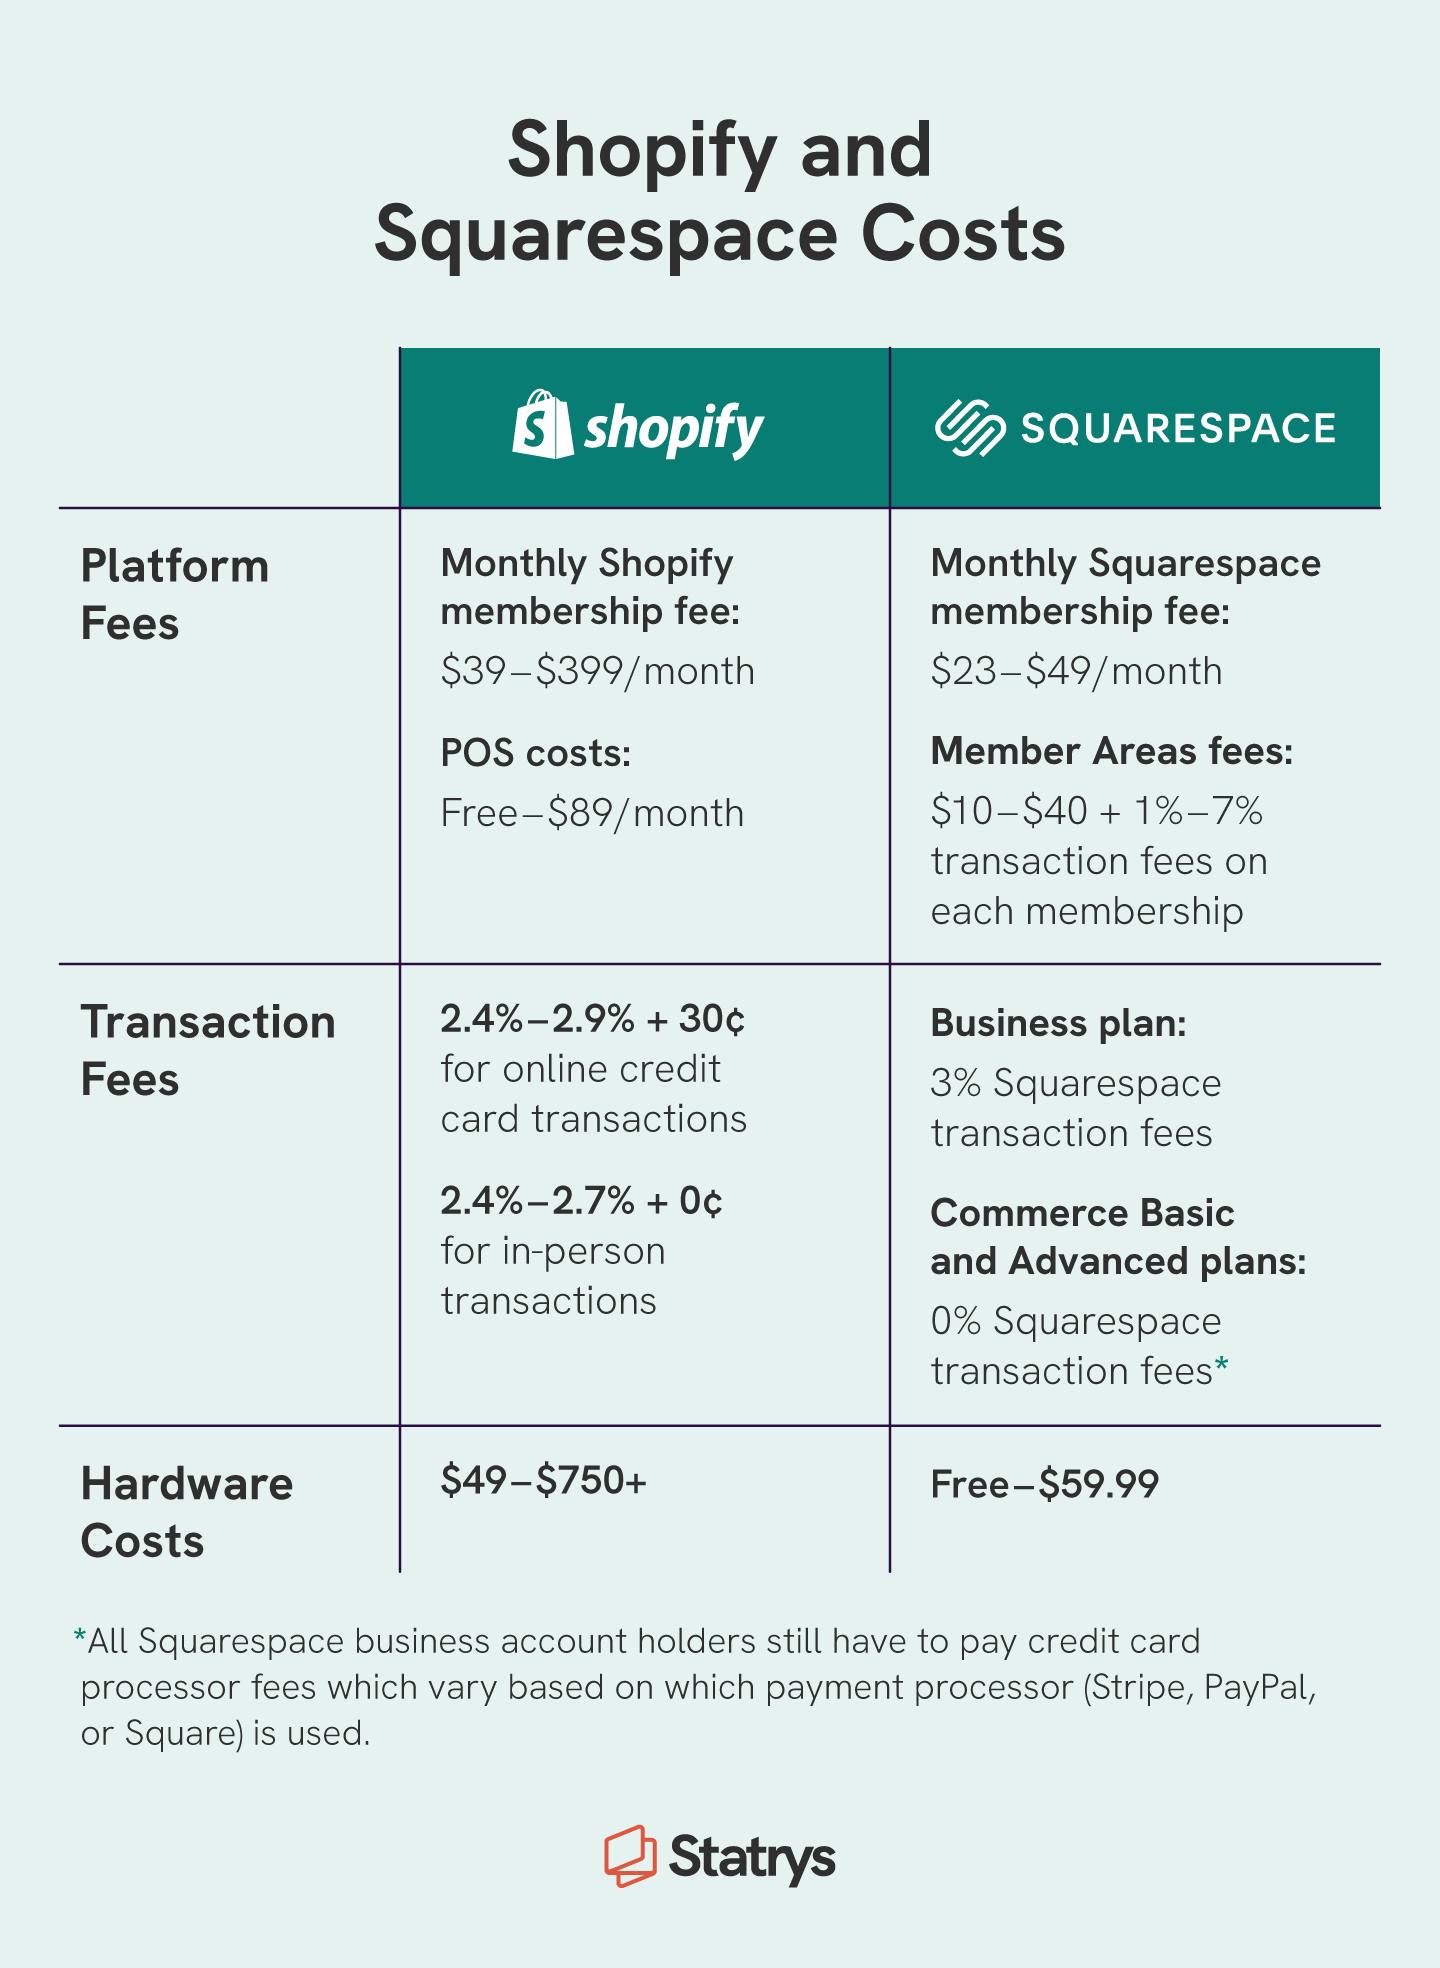 Chart covering costs between Shopify vs Squarespace including platform, transaction, and hardware fees.  